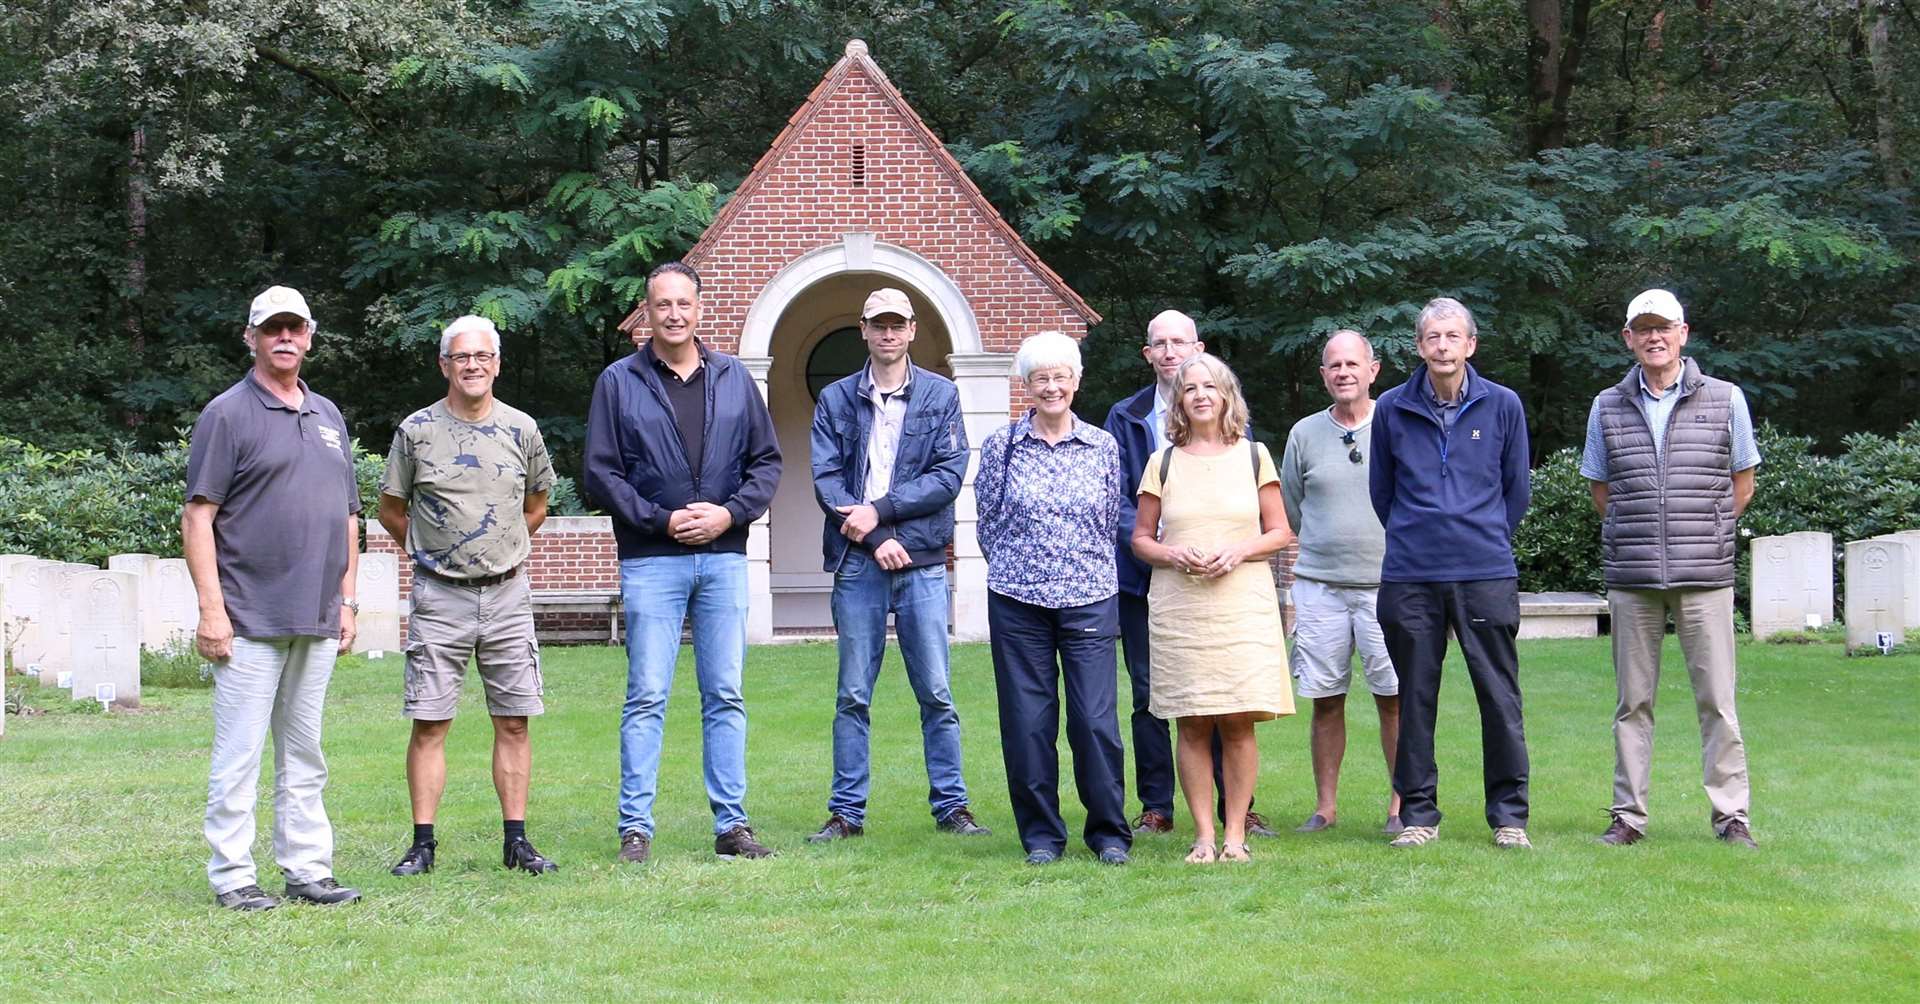 The trustees of the Overloon War Chronicles Foundation, with Elaine Gathercole fifth from the left